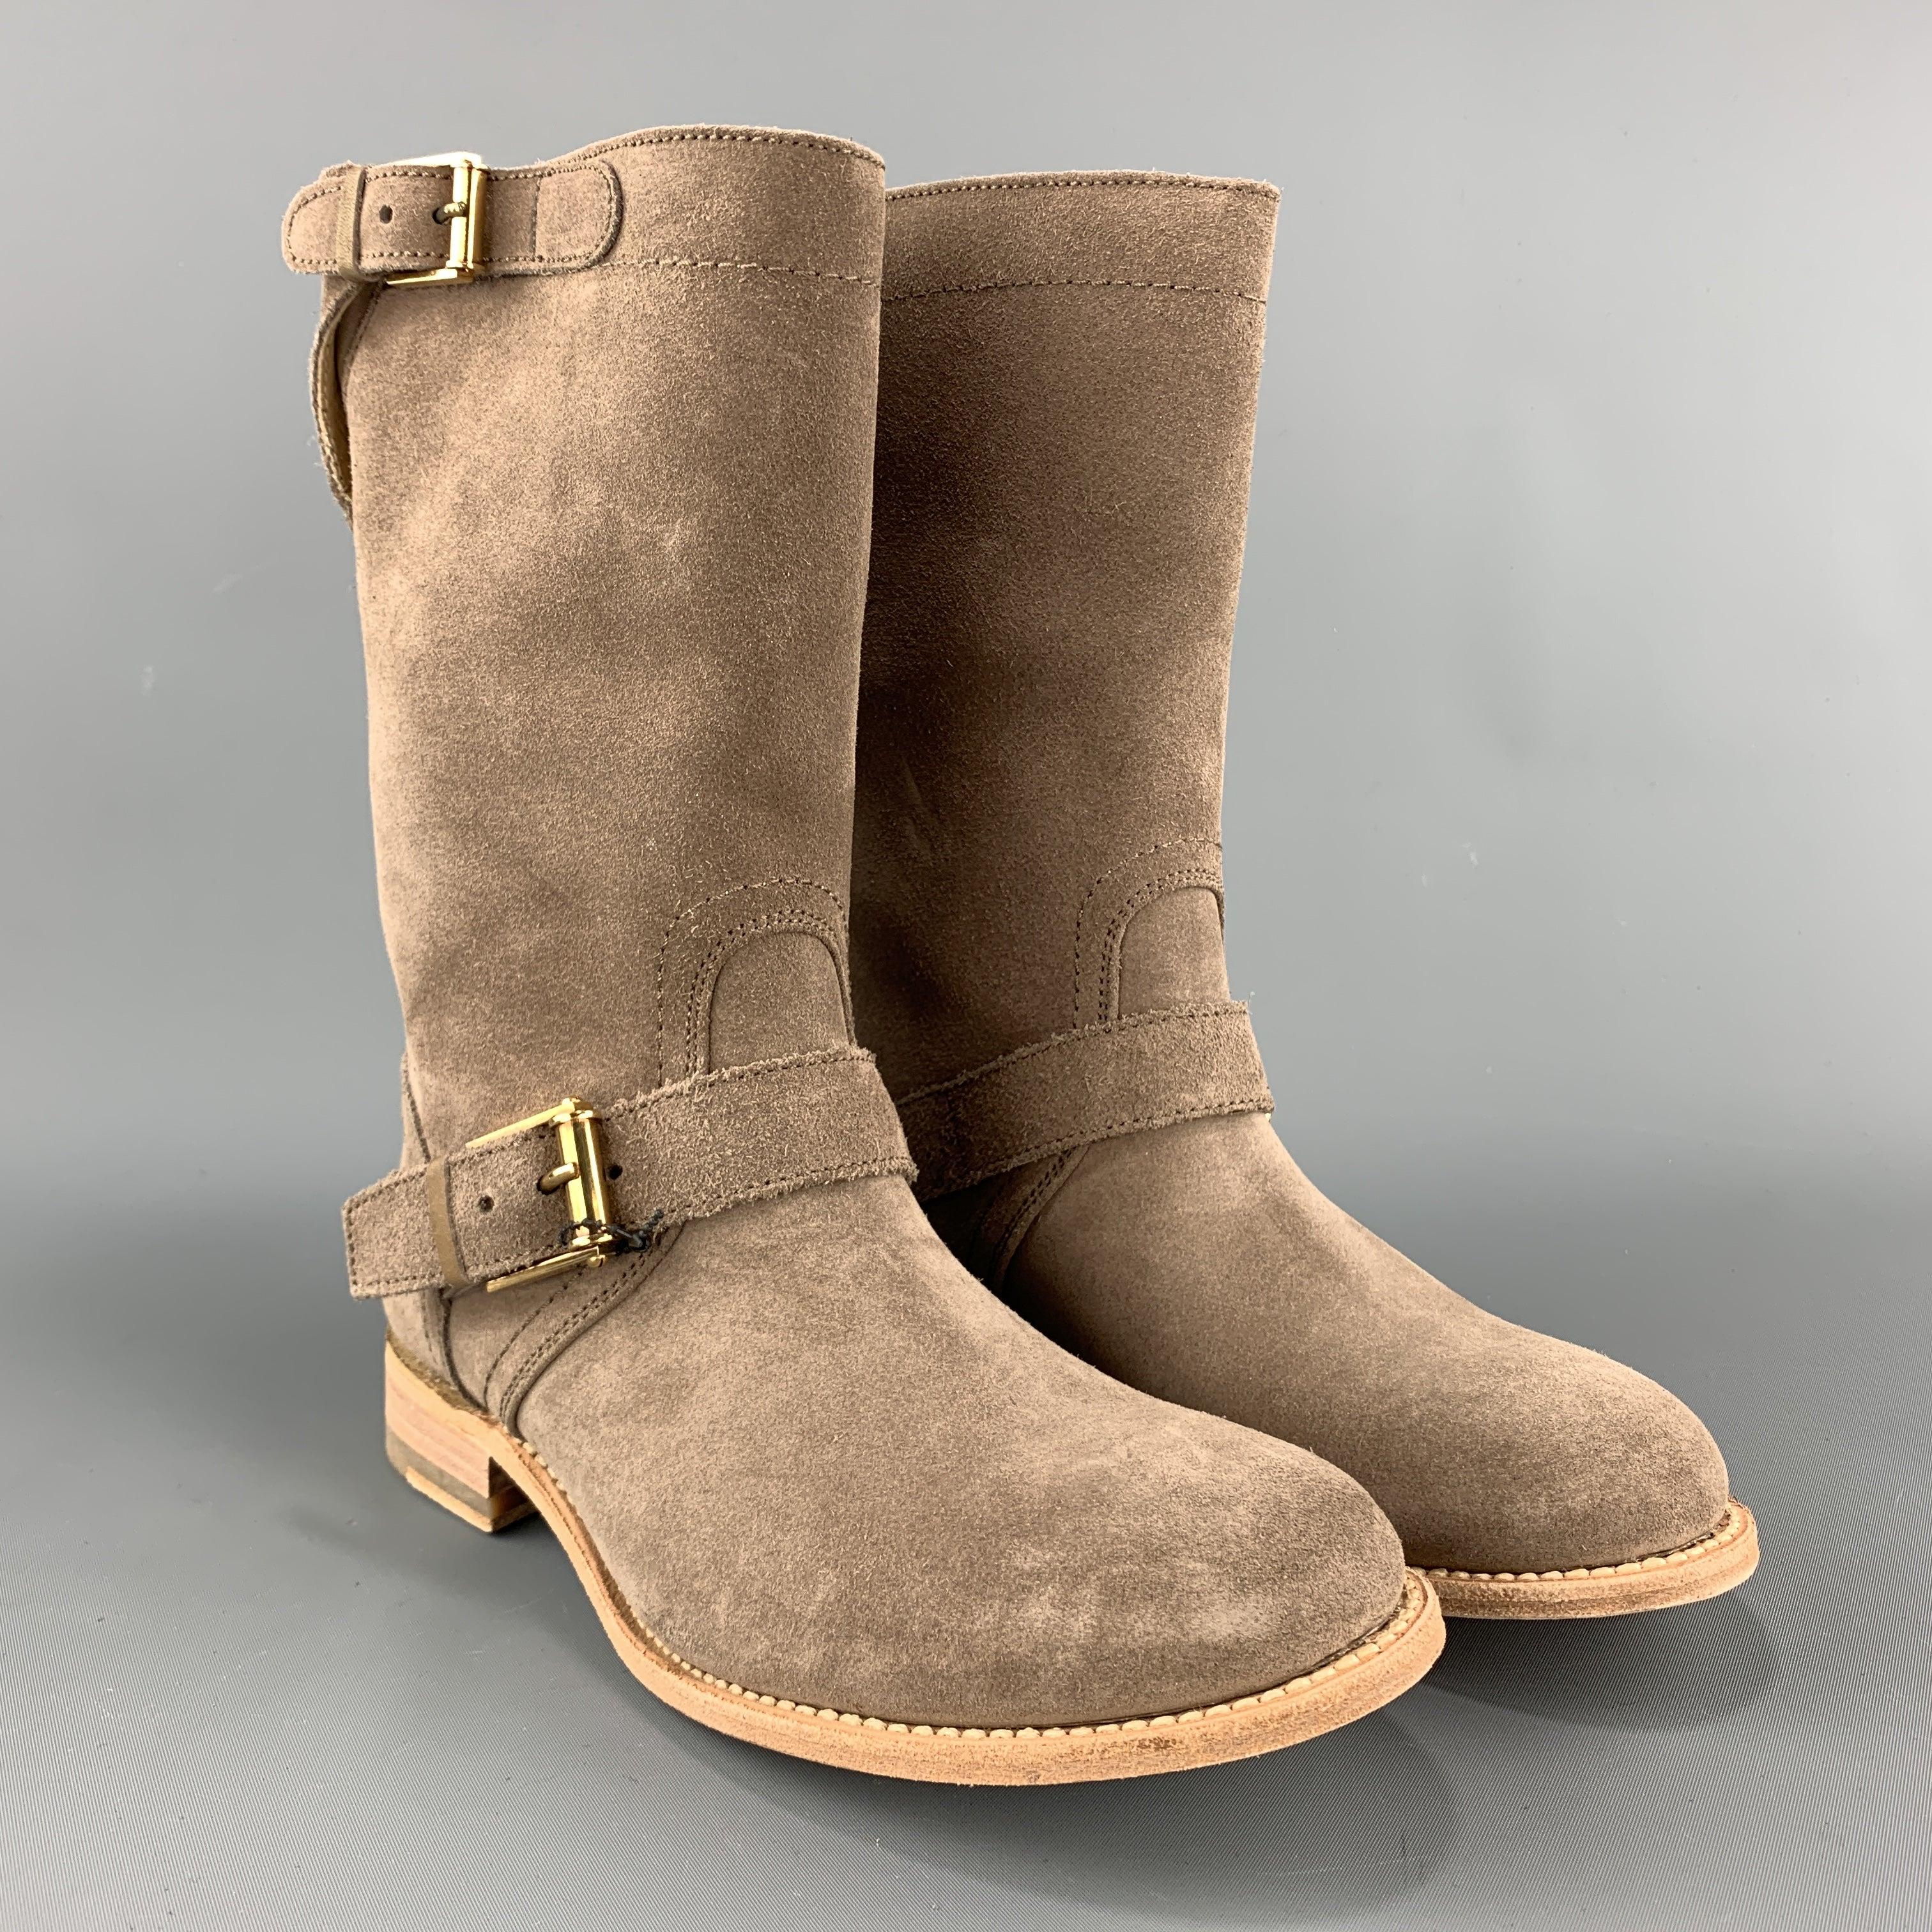 JIL SANDER biker style boots come in taupe suede with ankle strap, gold tone buckles, and tan sole. With box. Made in Spainches Brand New.
 

Marked:   IT 37Outsole: 10.25 x 3.75 inches Length: 10 inches 
  
  
 
Reference: 101581
Category: